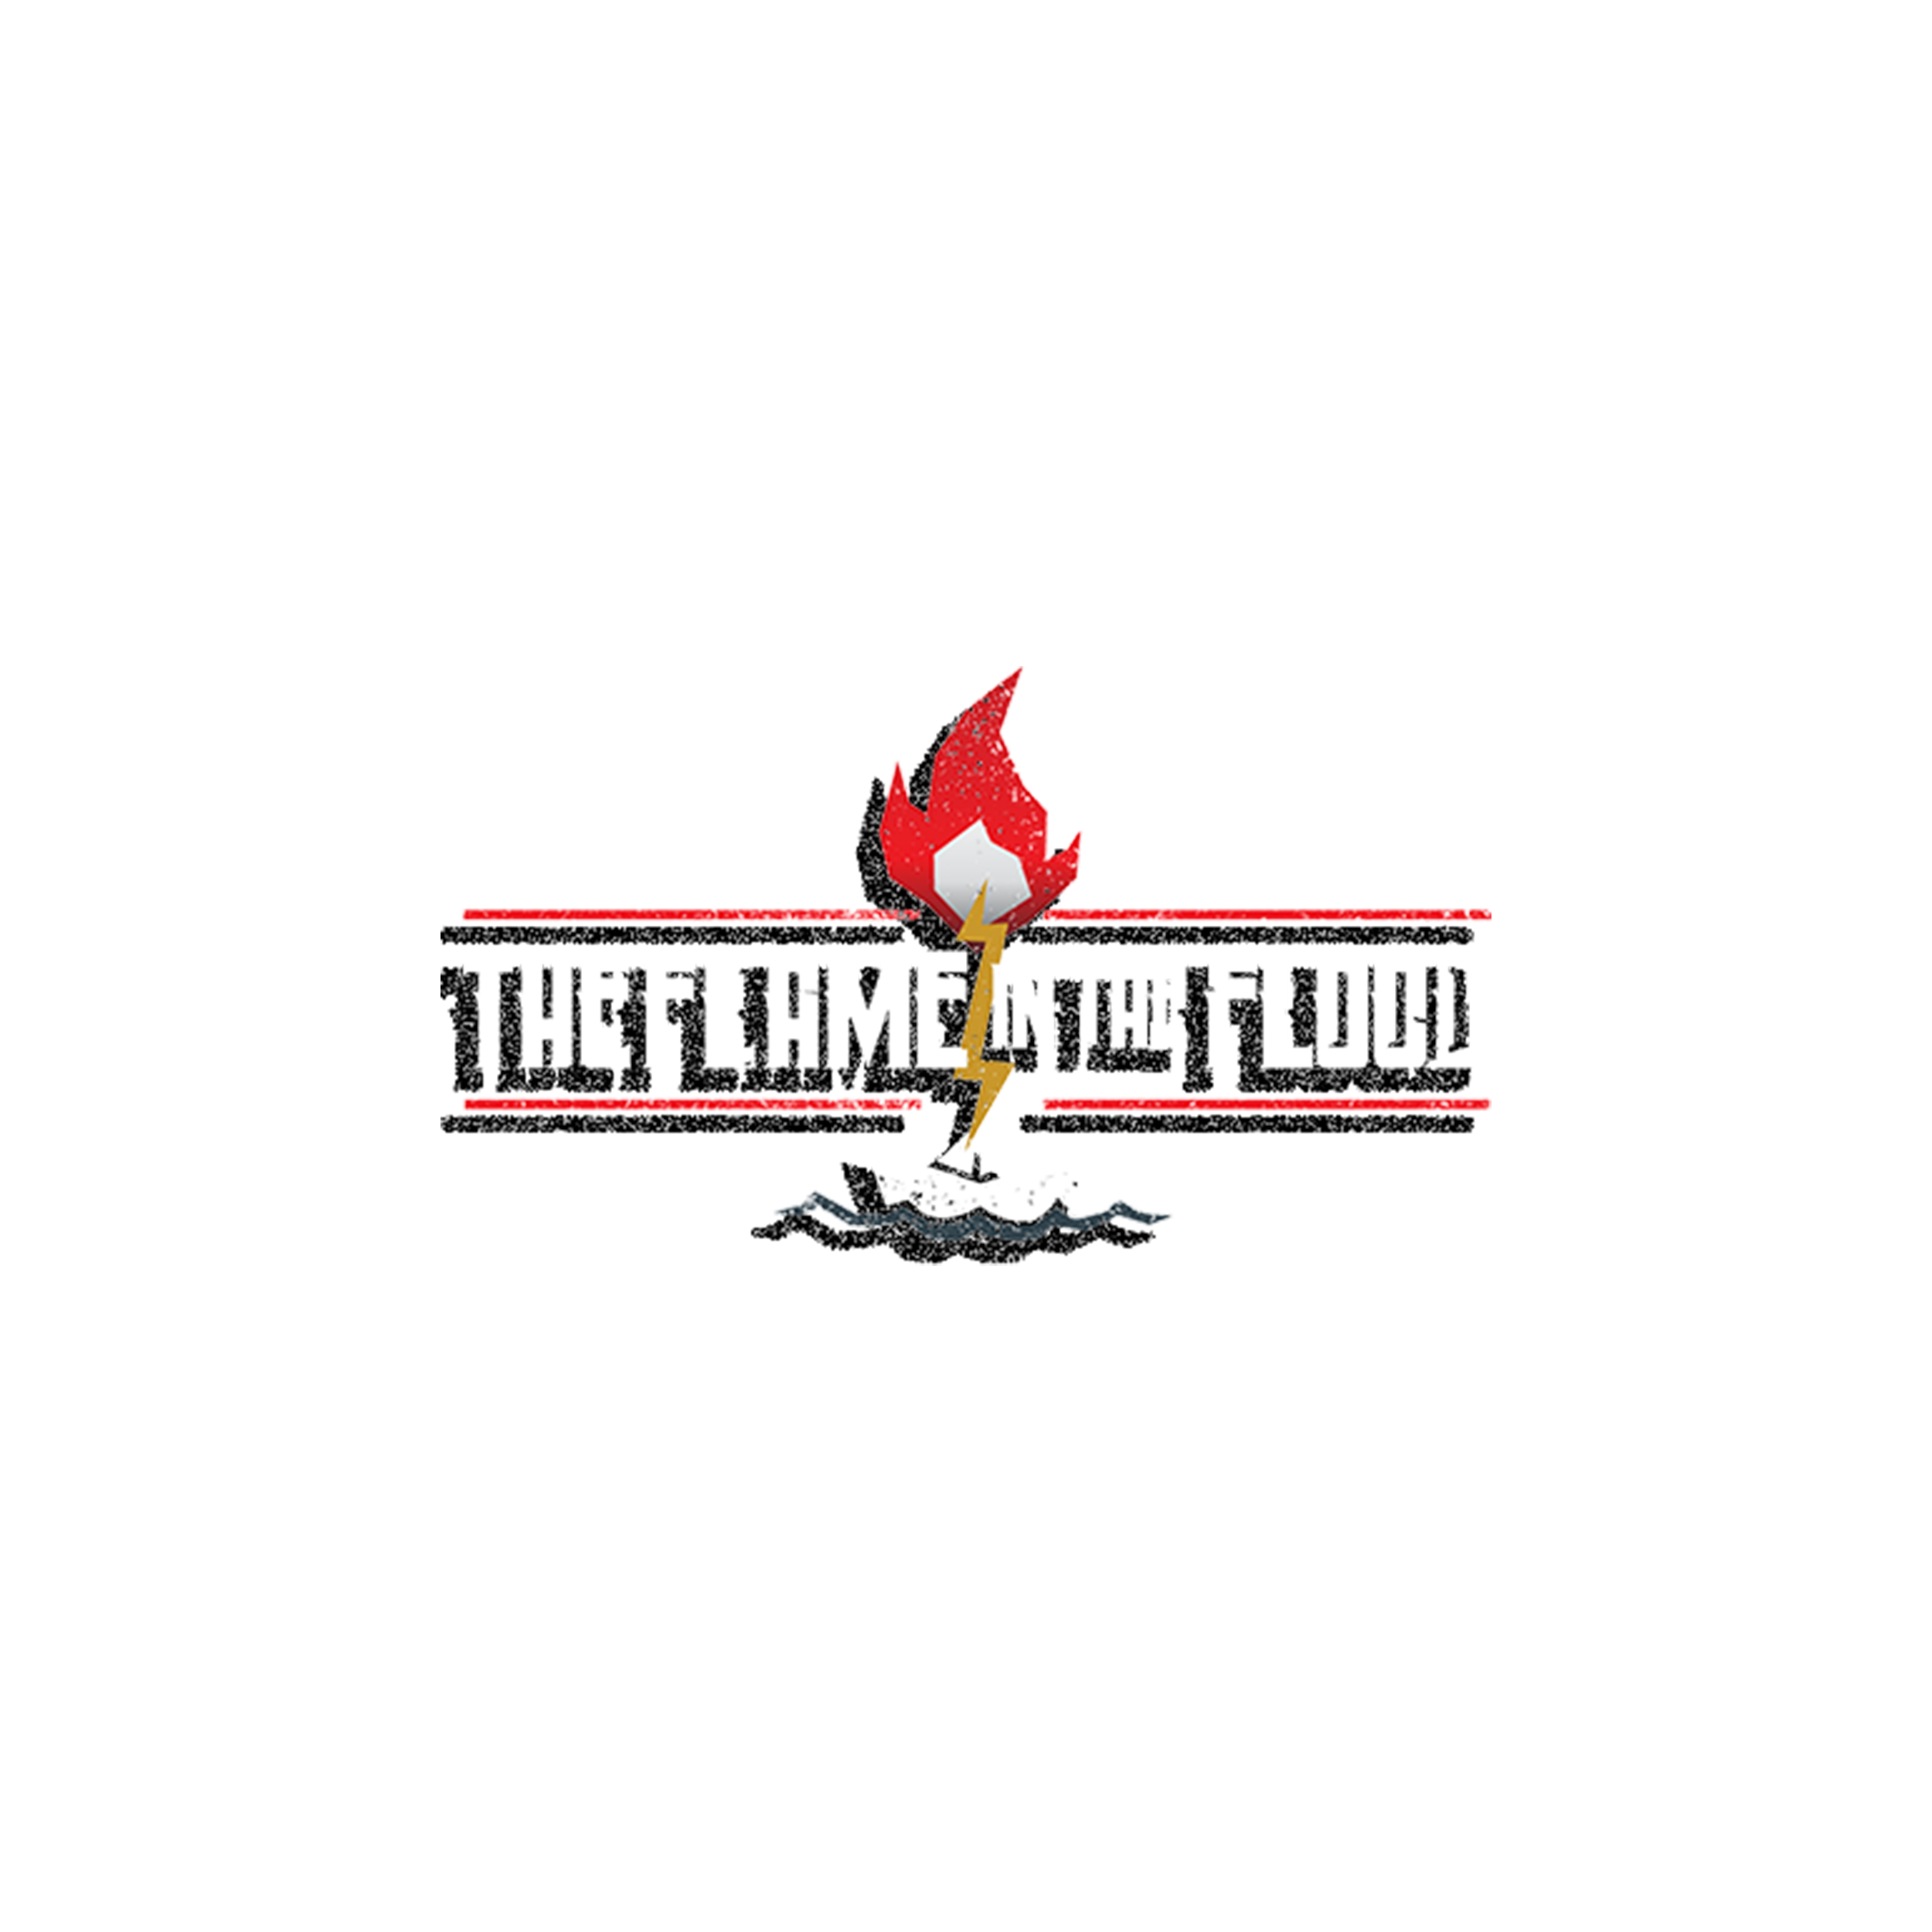 The Flame in the Flood logo